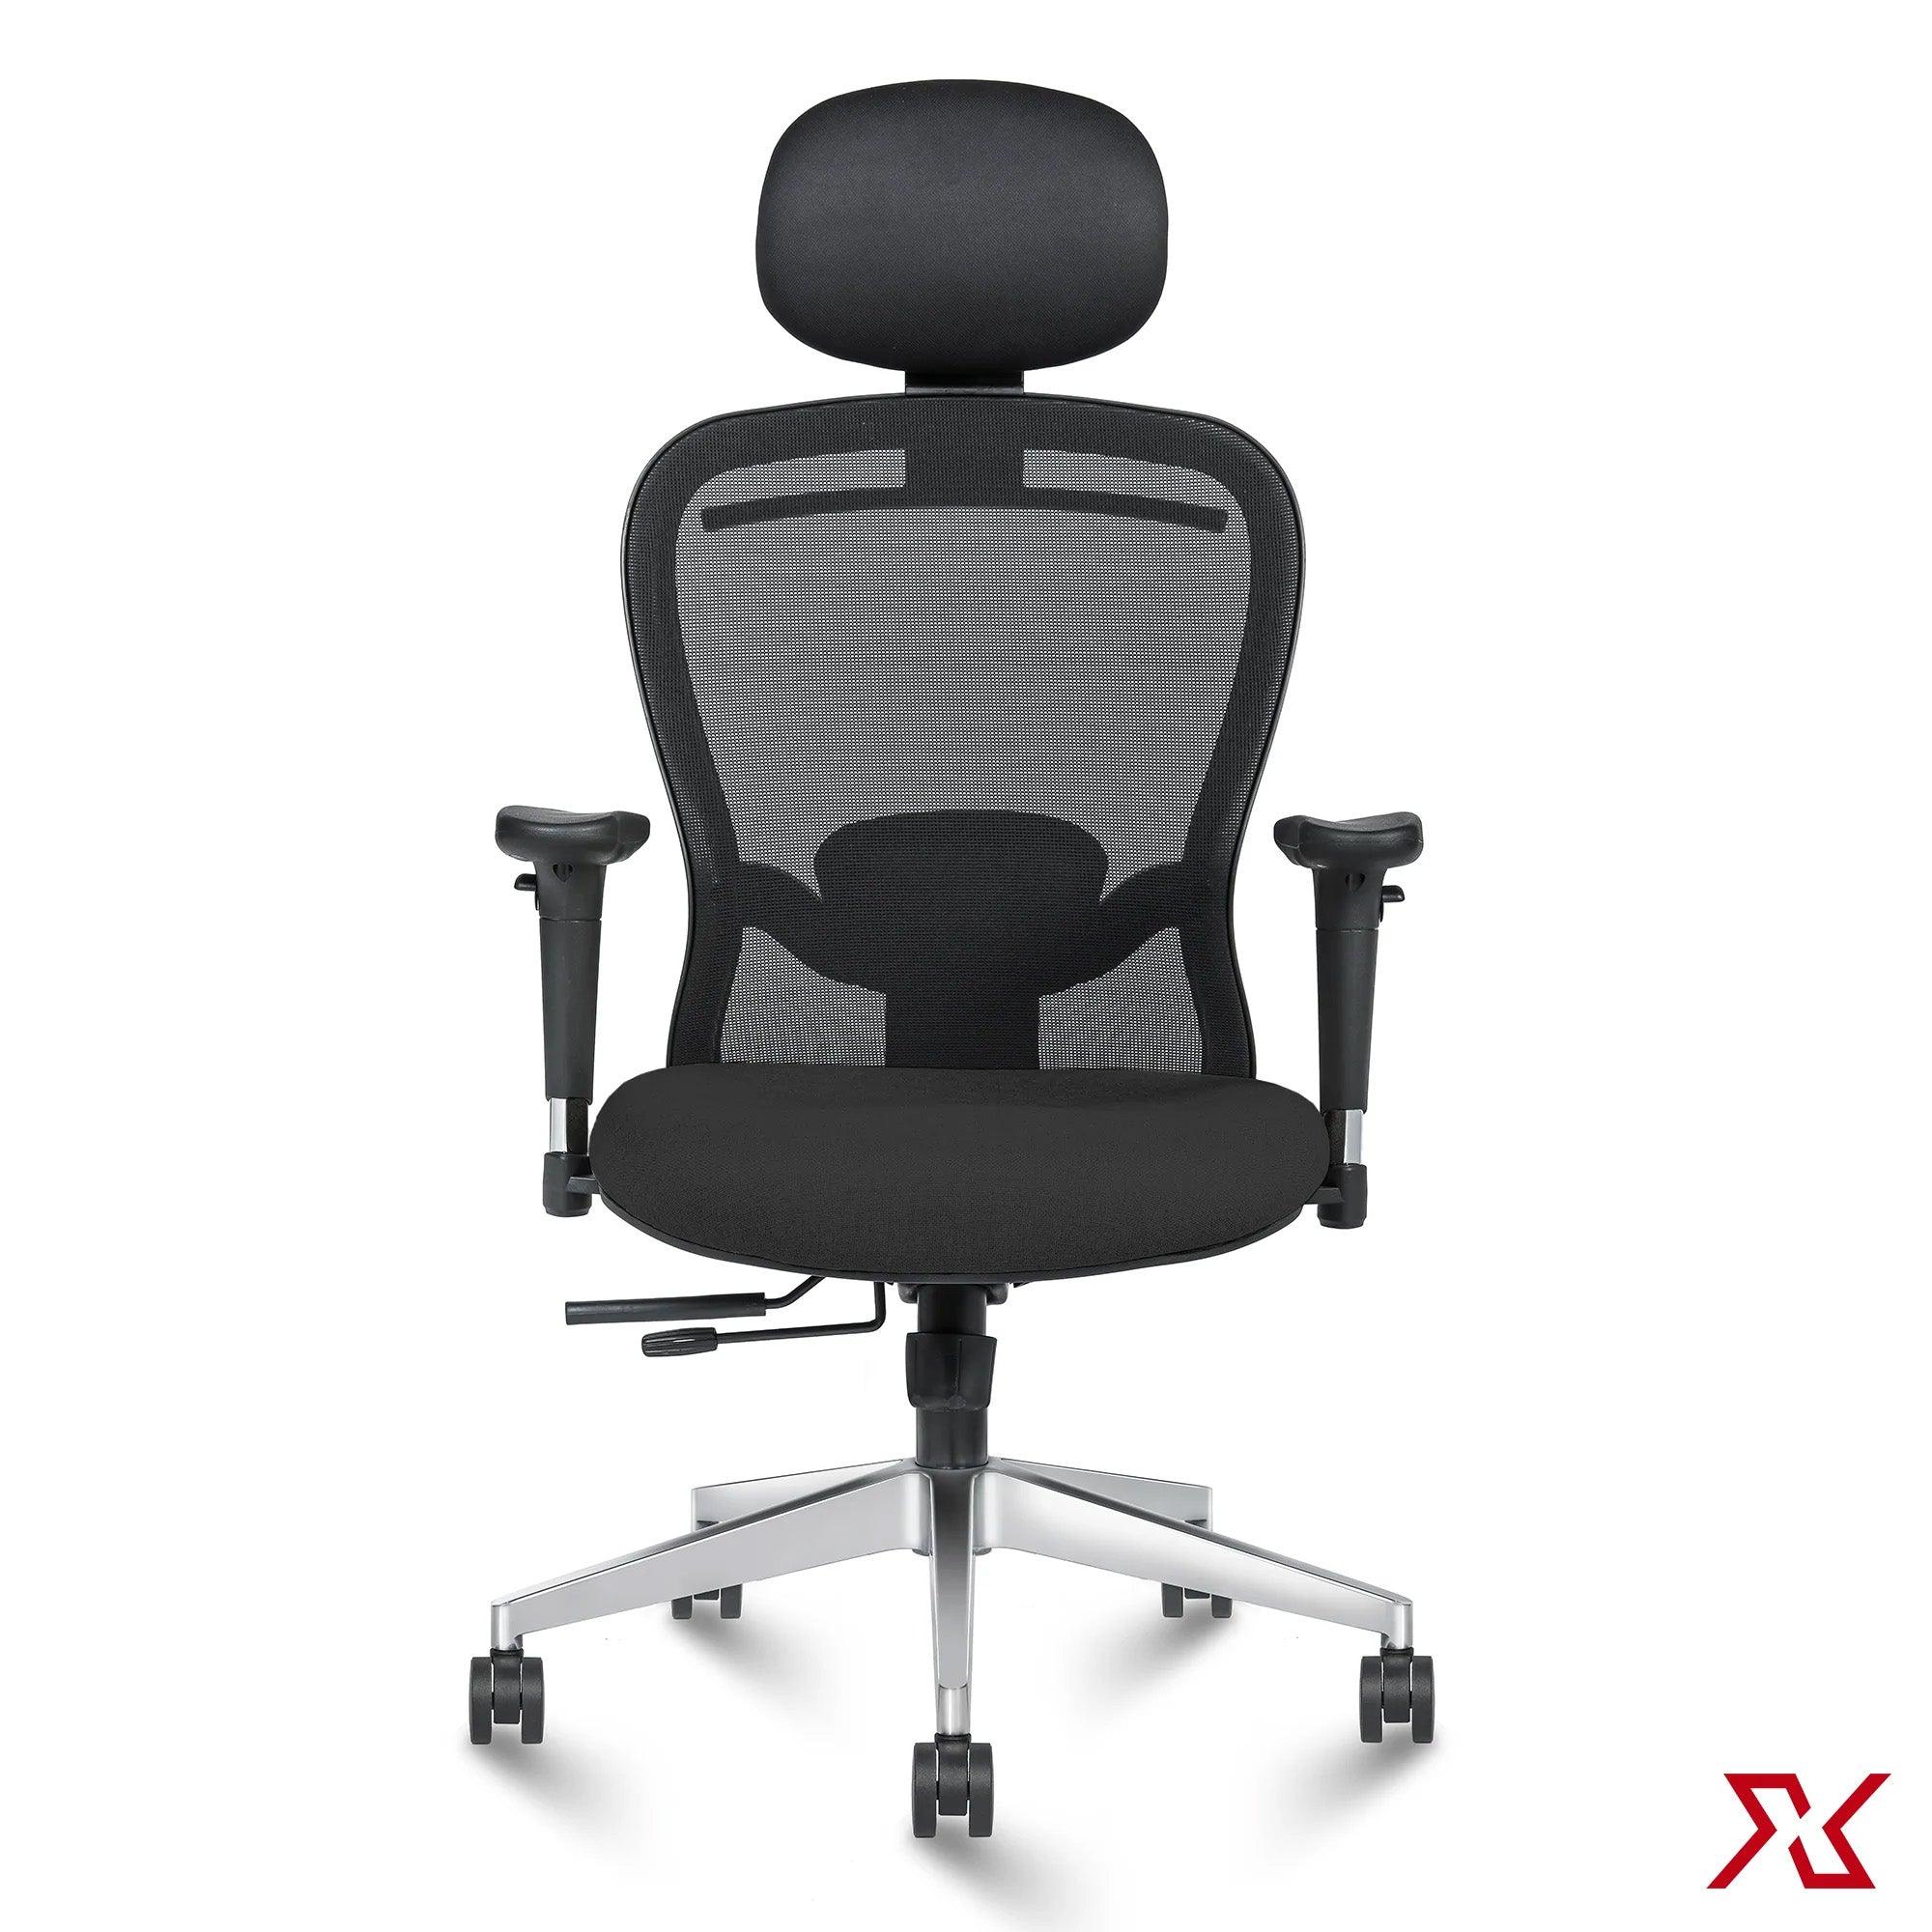 DUNE High Back Max (Black Chair) - Exclusiff Seating Sytems